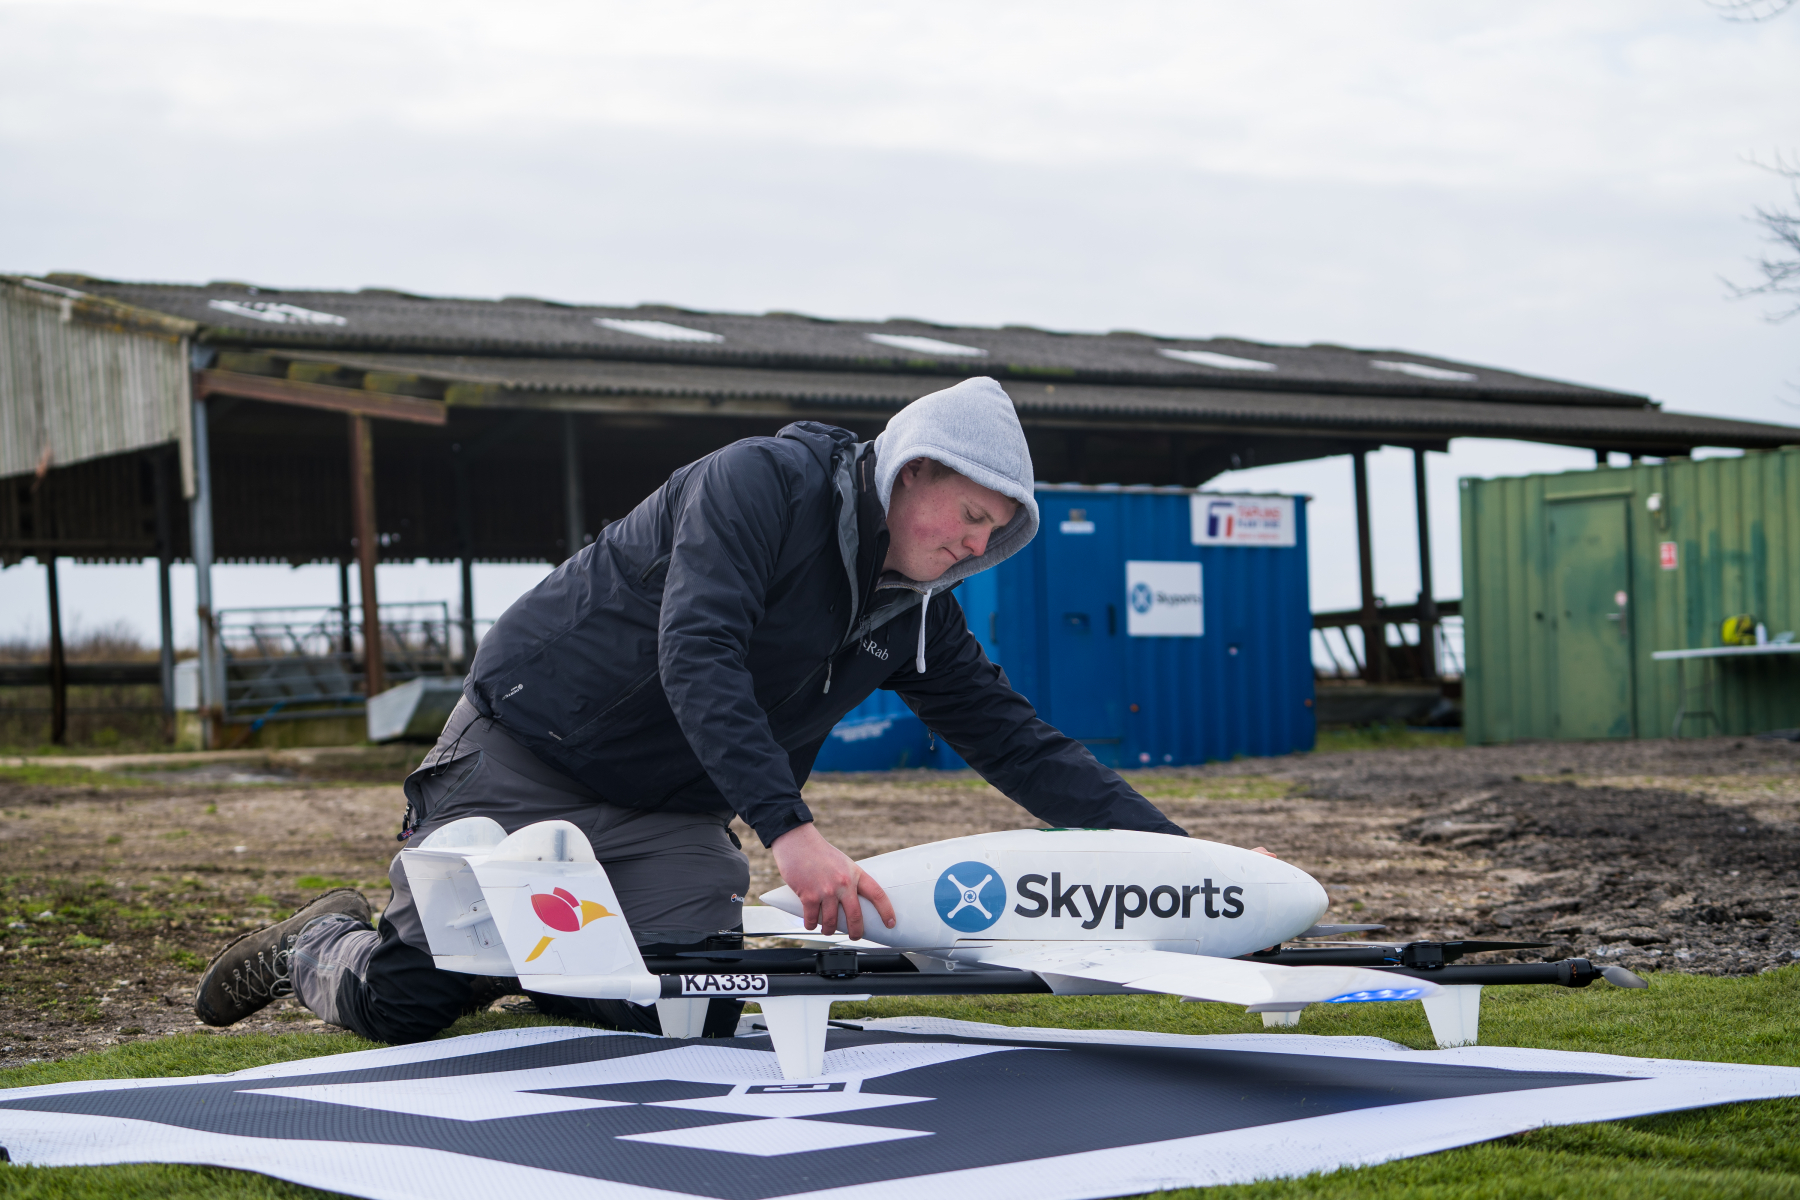 Skyports used a range of space services and data to plan and operate the drones.